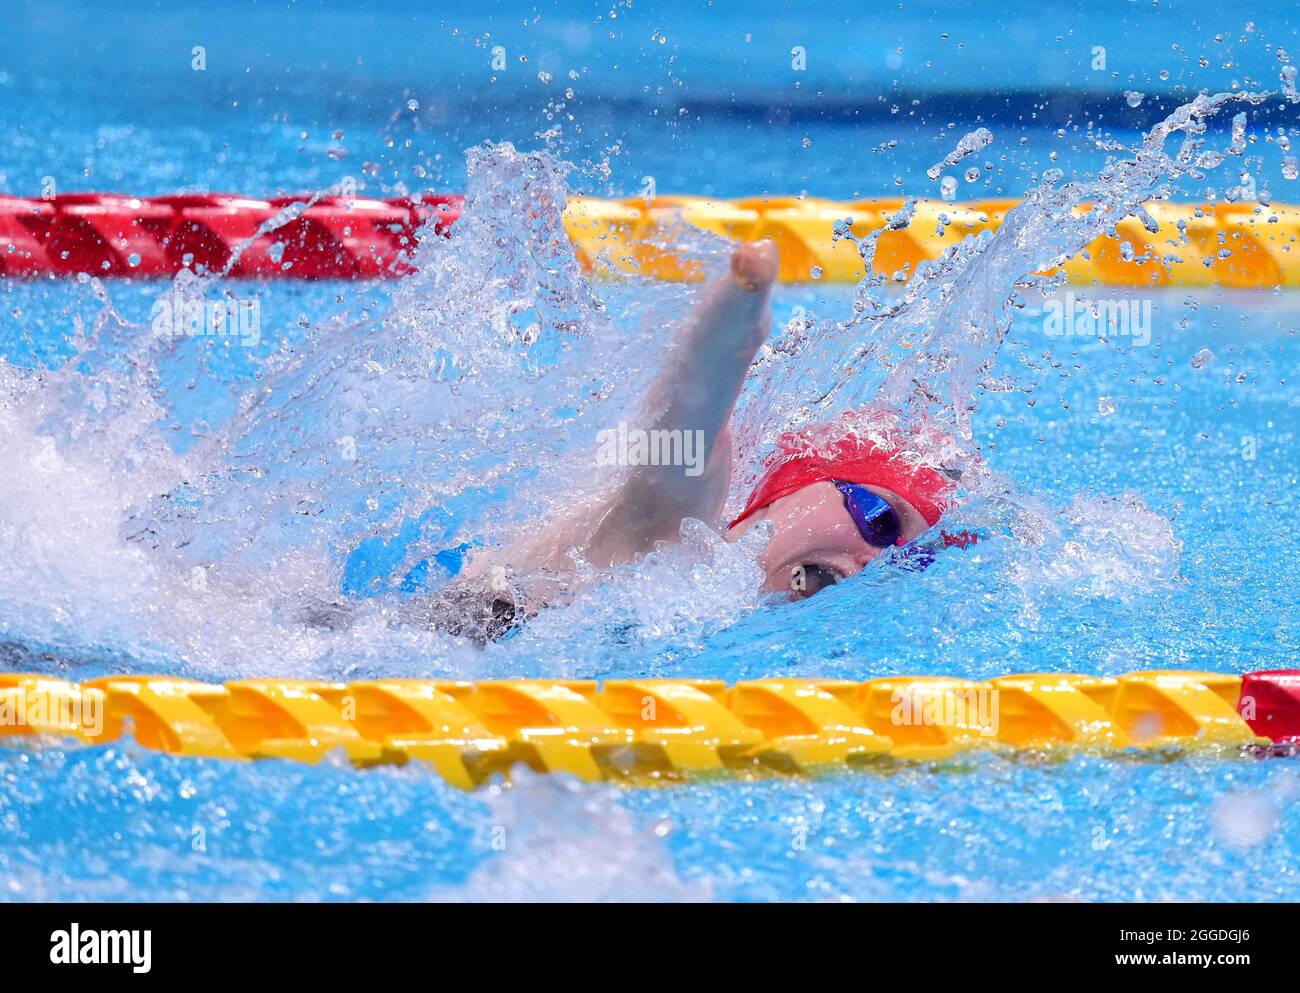 Great Britain's Toni Shaw competes in the Women's 100m Freestyle - S9 Final at the Tokyo Aquatics Centre during day seven of the Tokyo 2020 Paralympic Games in Japan. Picture date: Tuesday August 31, 2021. Stock Photo